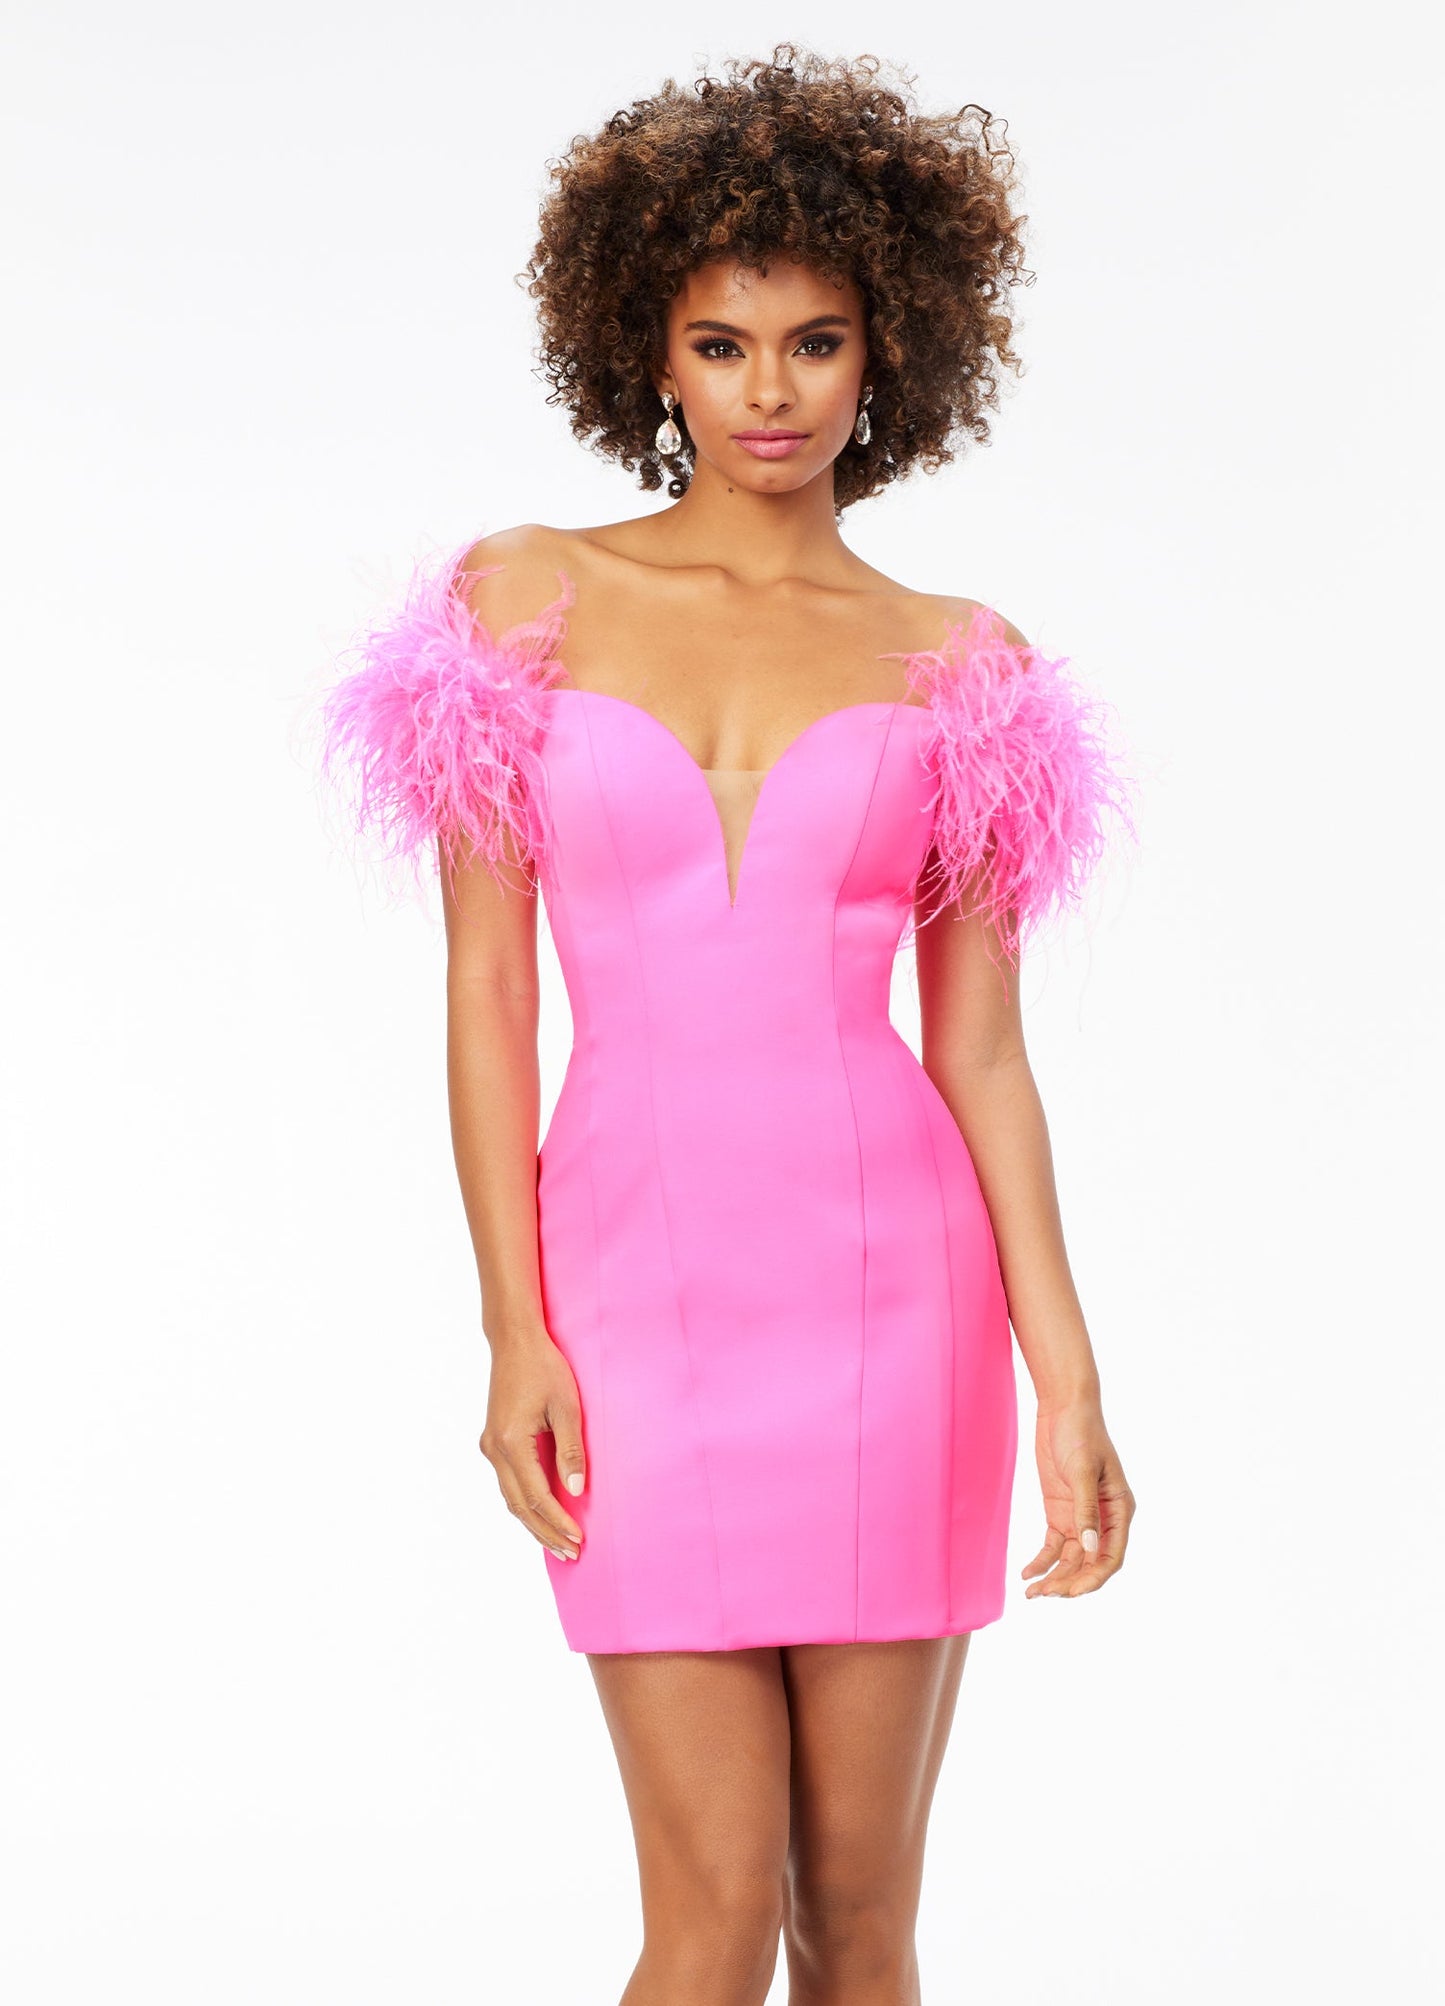 Ashley Lauren 4523  Be flirtatious in this off the shoulder scuba cocktail dress featuring feather details, a sweetheart neckline and our signature contour seaming to provide the perfect silhouette.  Available colors:  Hot Pink, Black Orchid, Black/White, Red, White, Turquoise